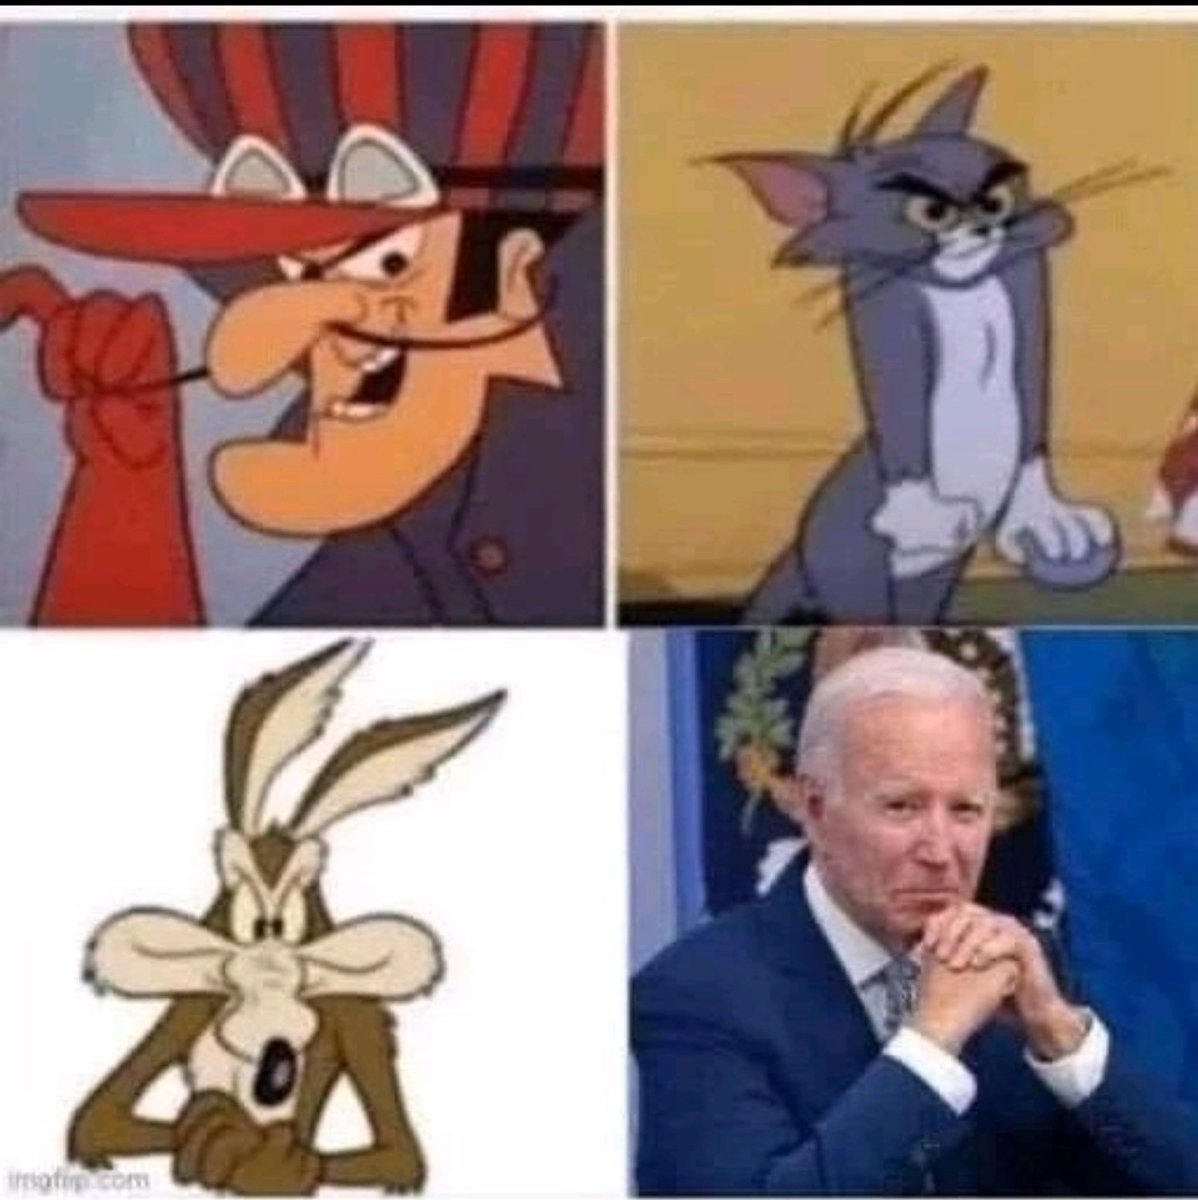 Old school Saturday morning cartoon villains are better than the trash named Joe Biden, who sits in the Whitehouse currently...